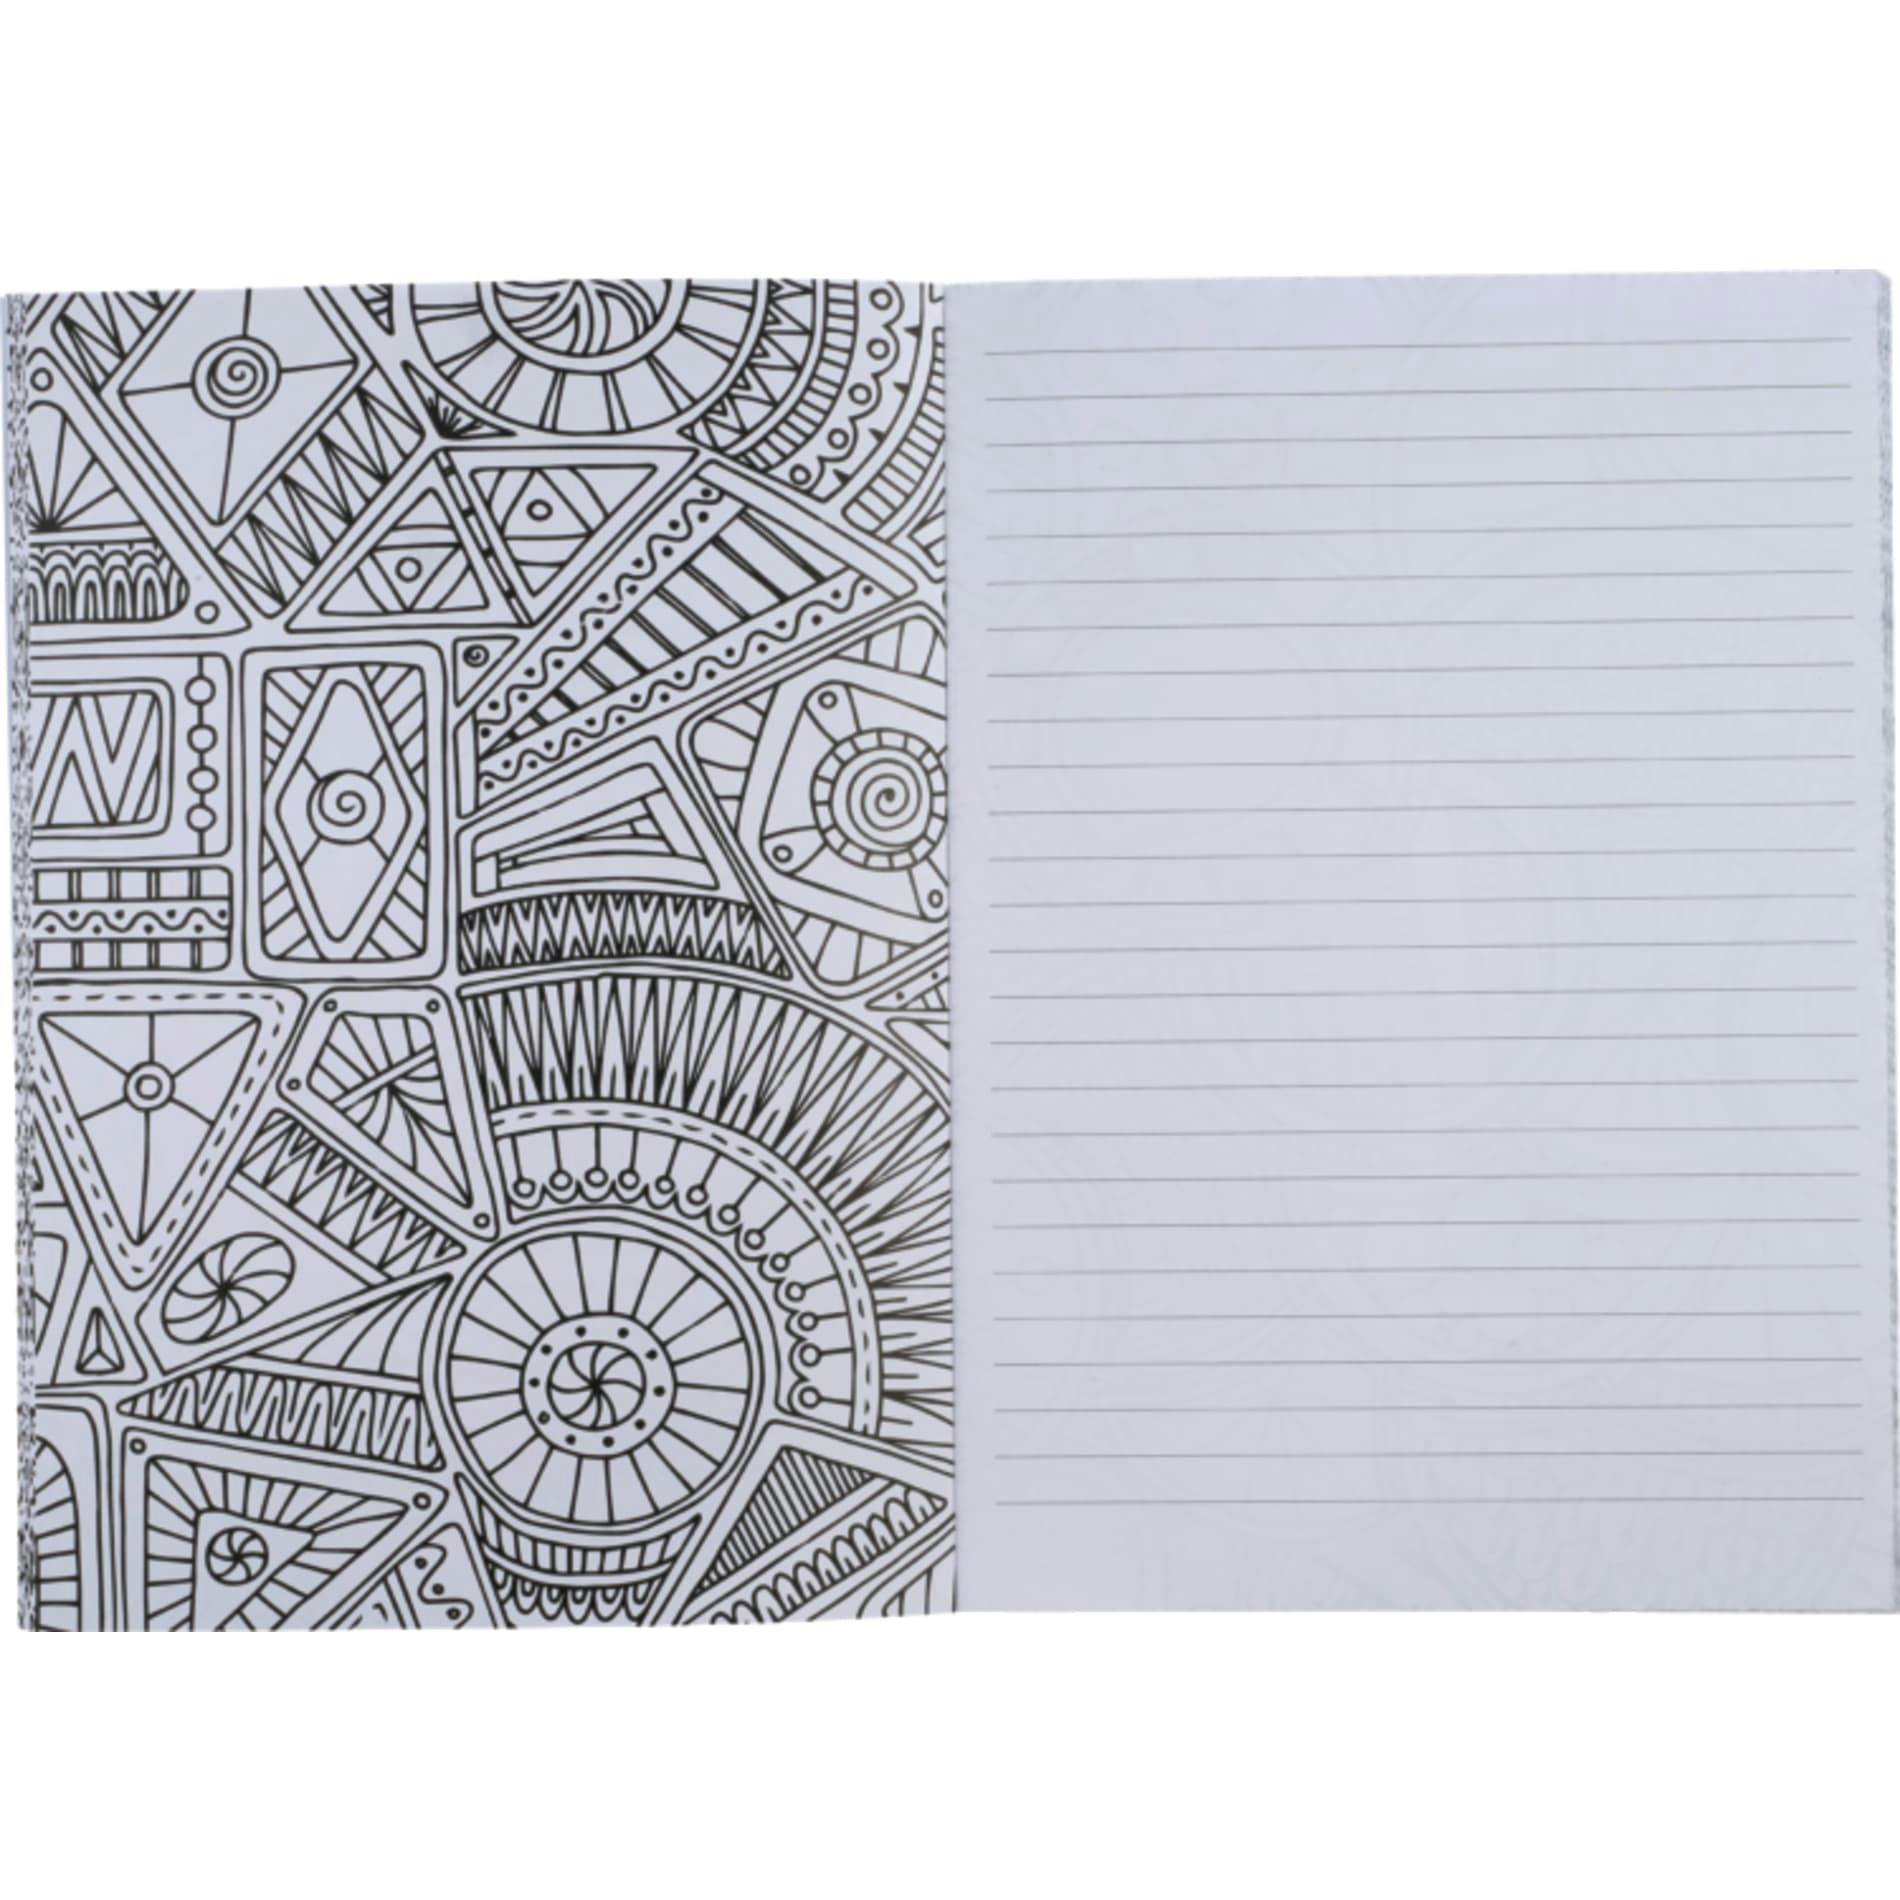 5.5" x 8.5" Doodle Coloring Notebook - additional Image 2